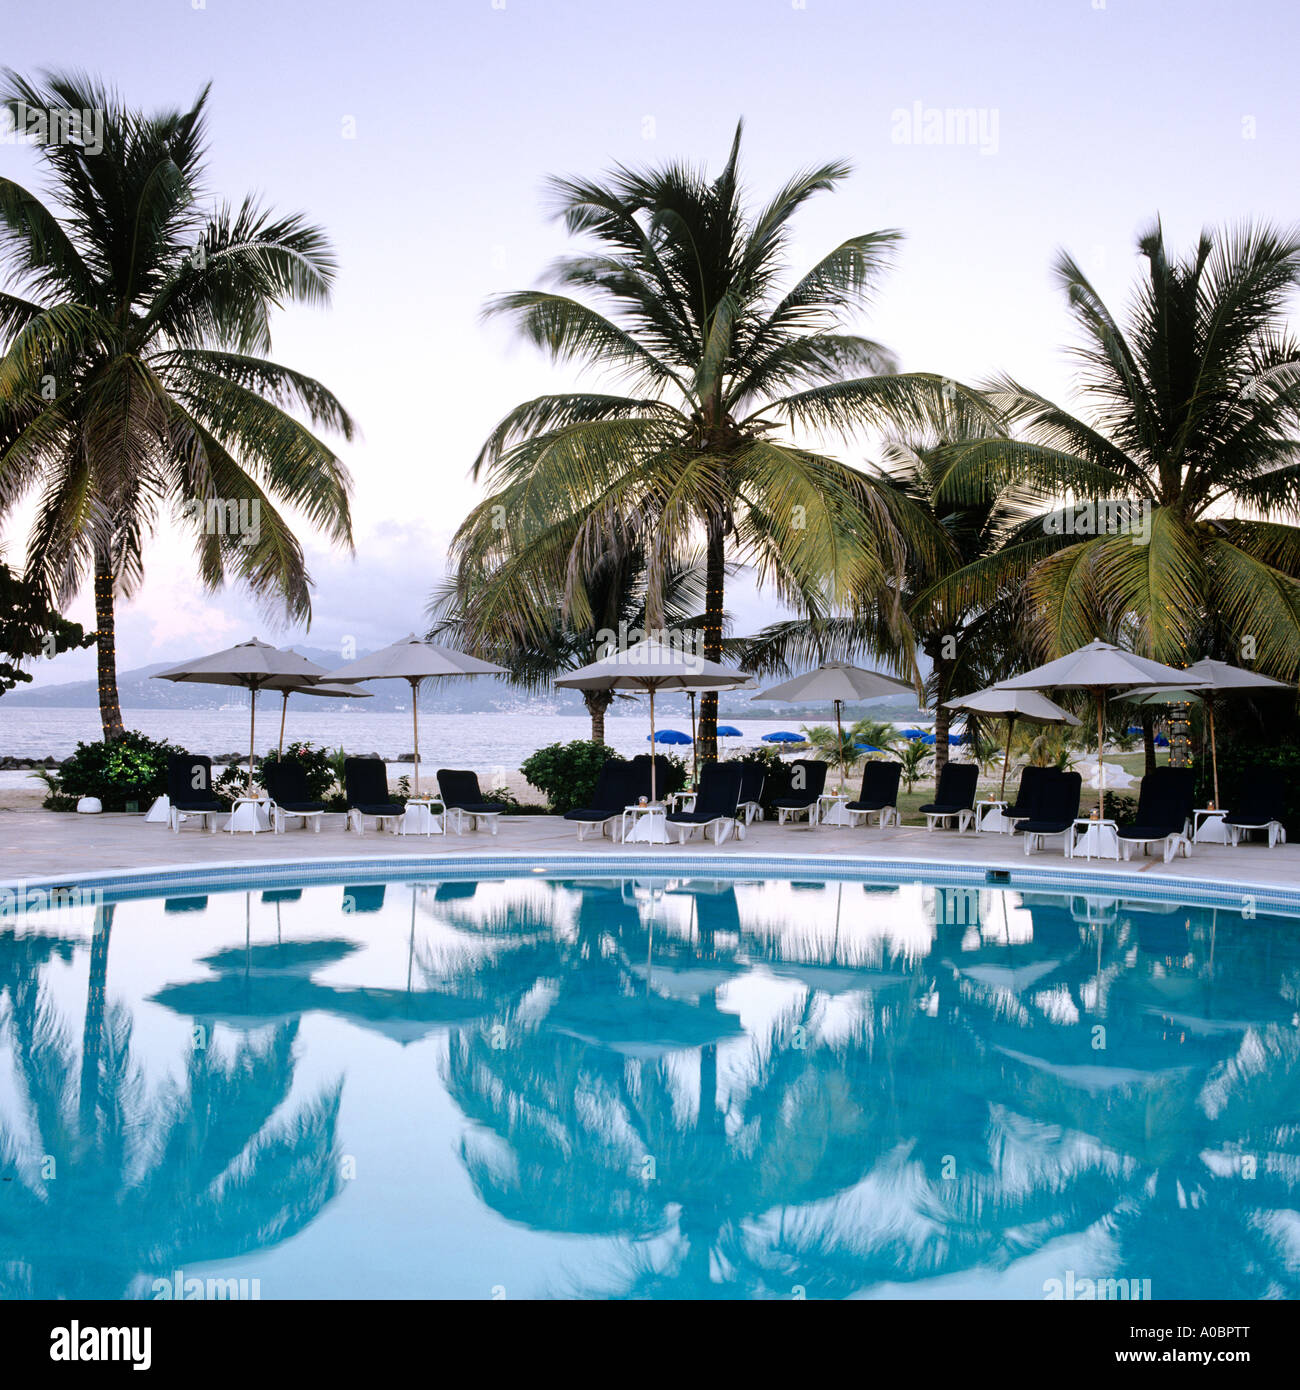 Swimming pool and palm trees in a Caribbean resort Stock Photo